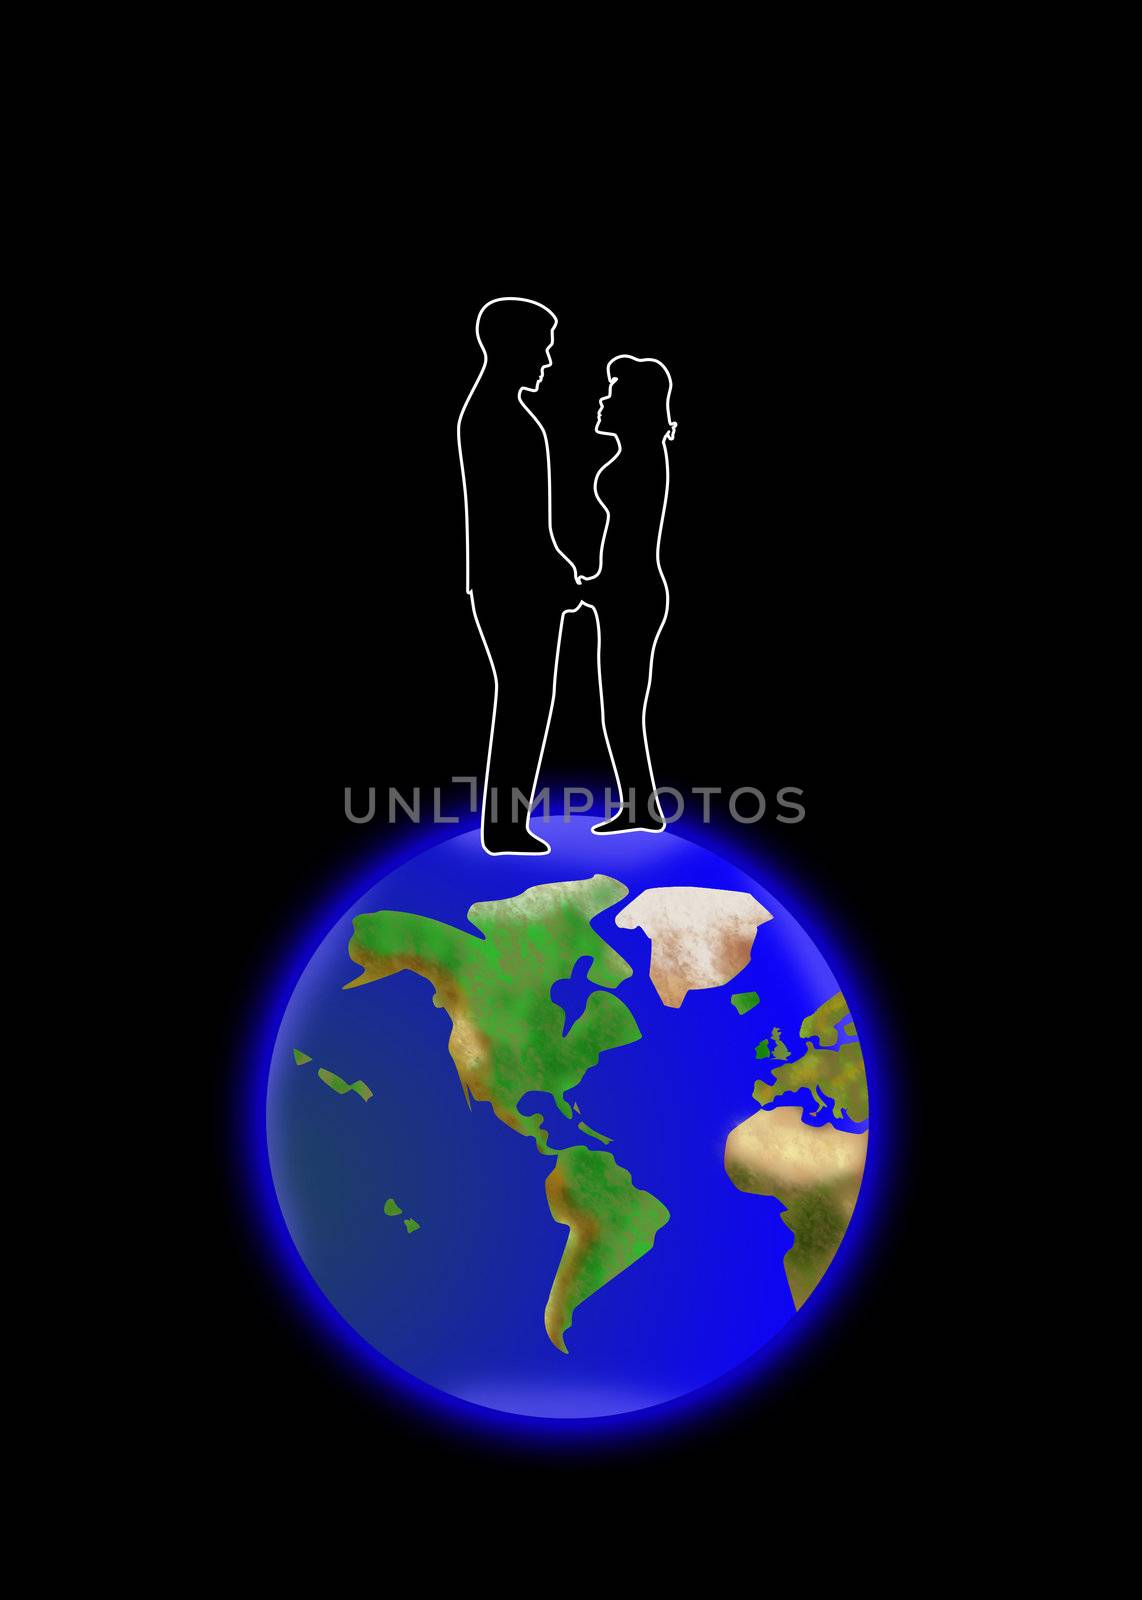 Couple holding hands on earth illustration